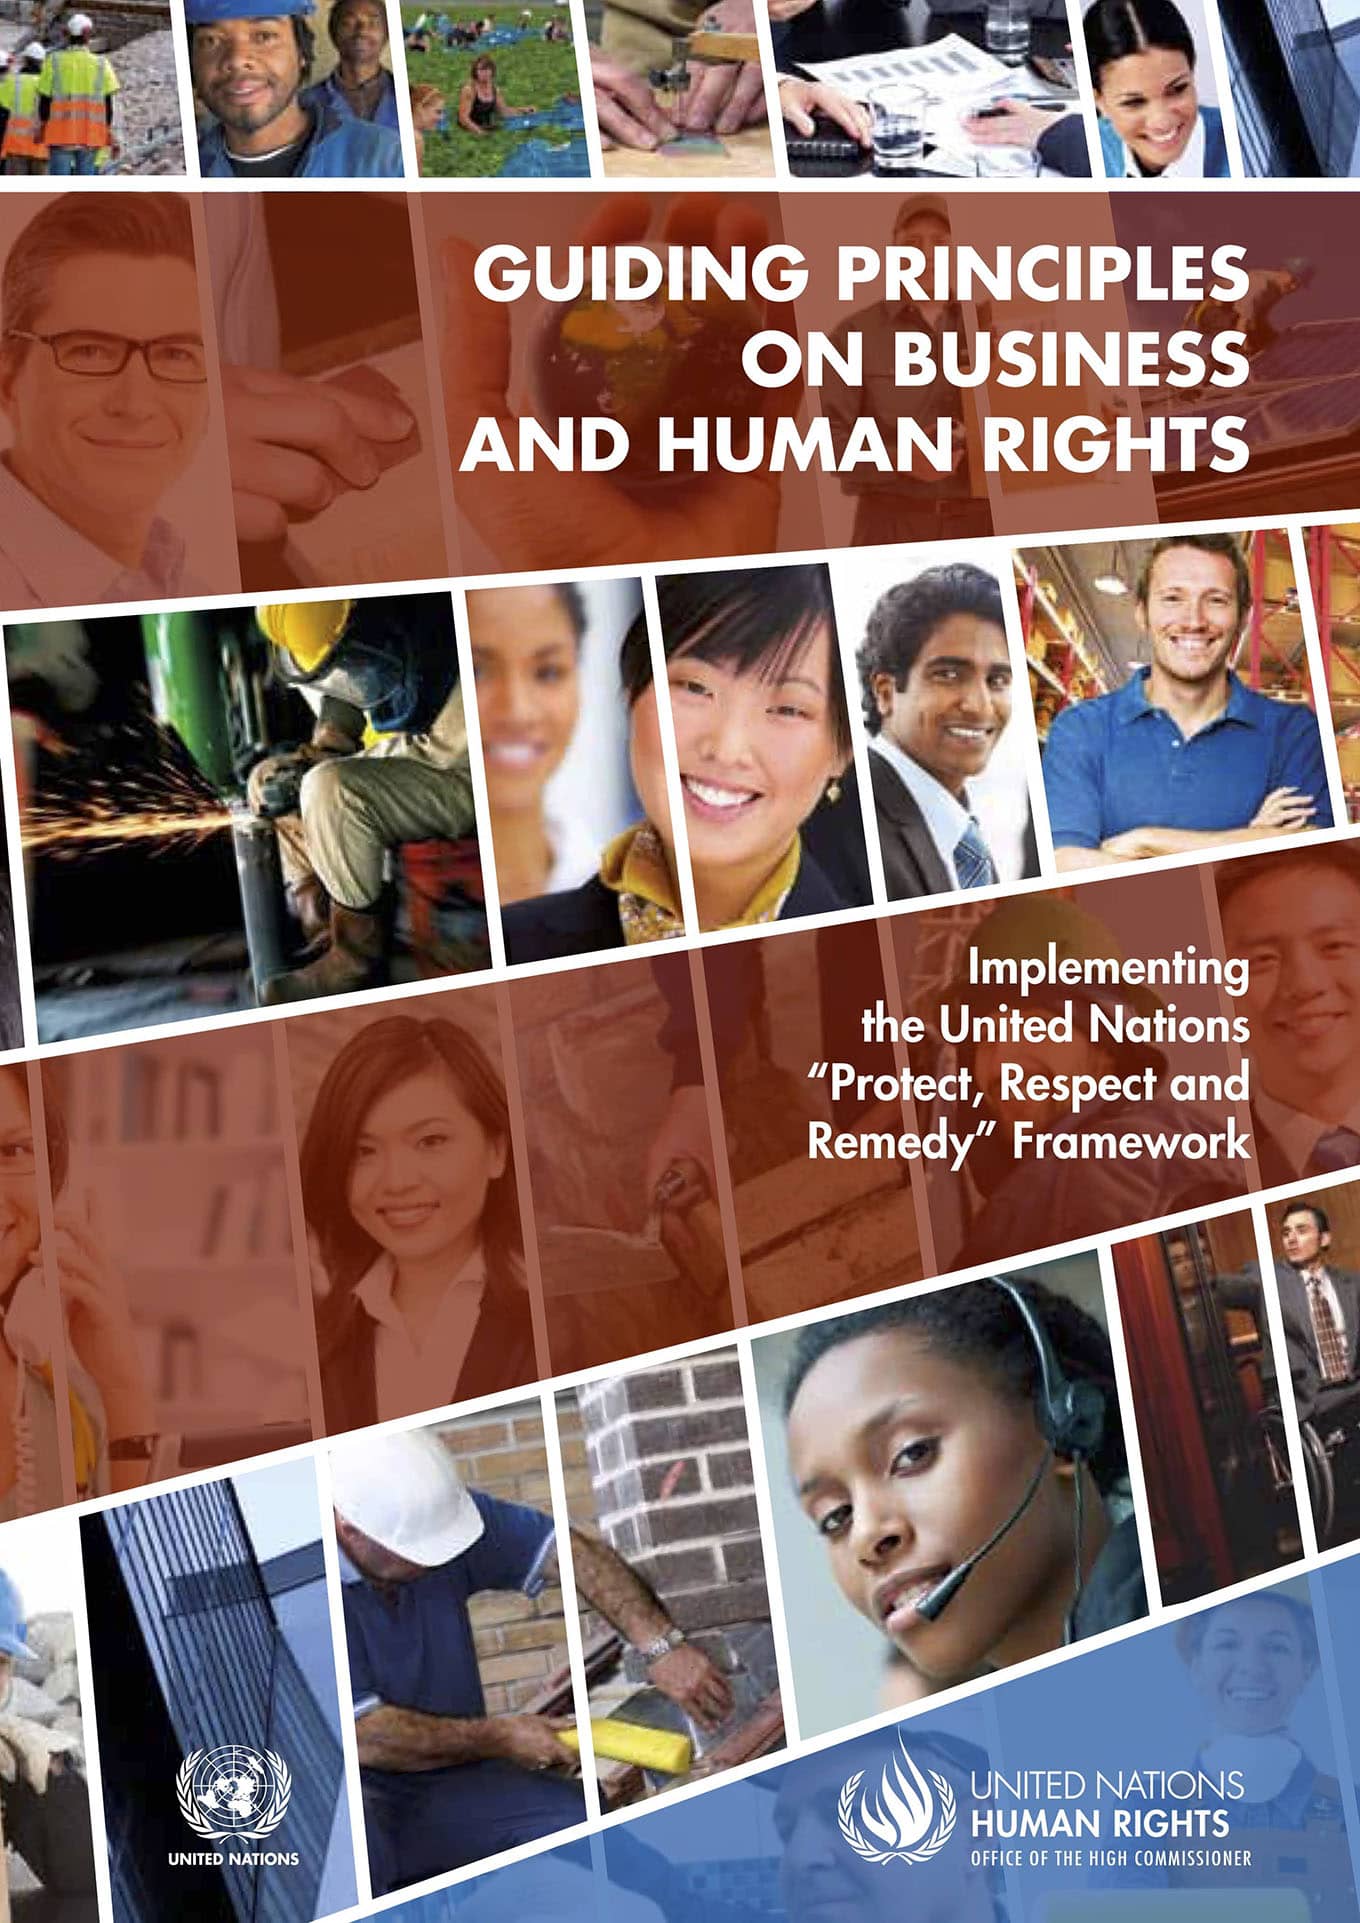 Guiding Principles on Business and Human Rights: Implementing the United Nations "Protect, Respect and Remedy" Framework (United Nations Human Rights, 2011)